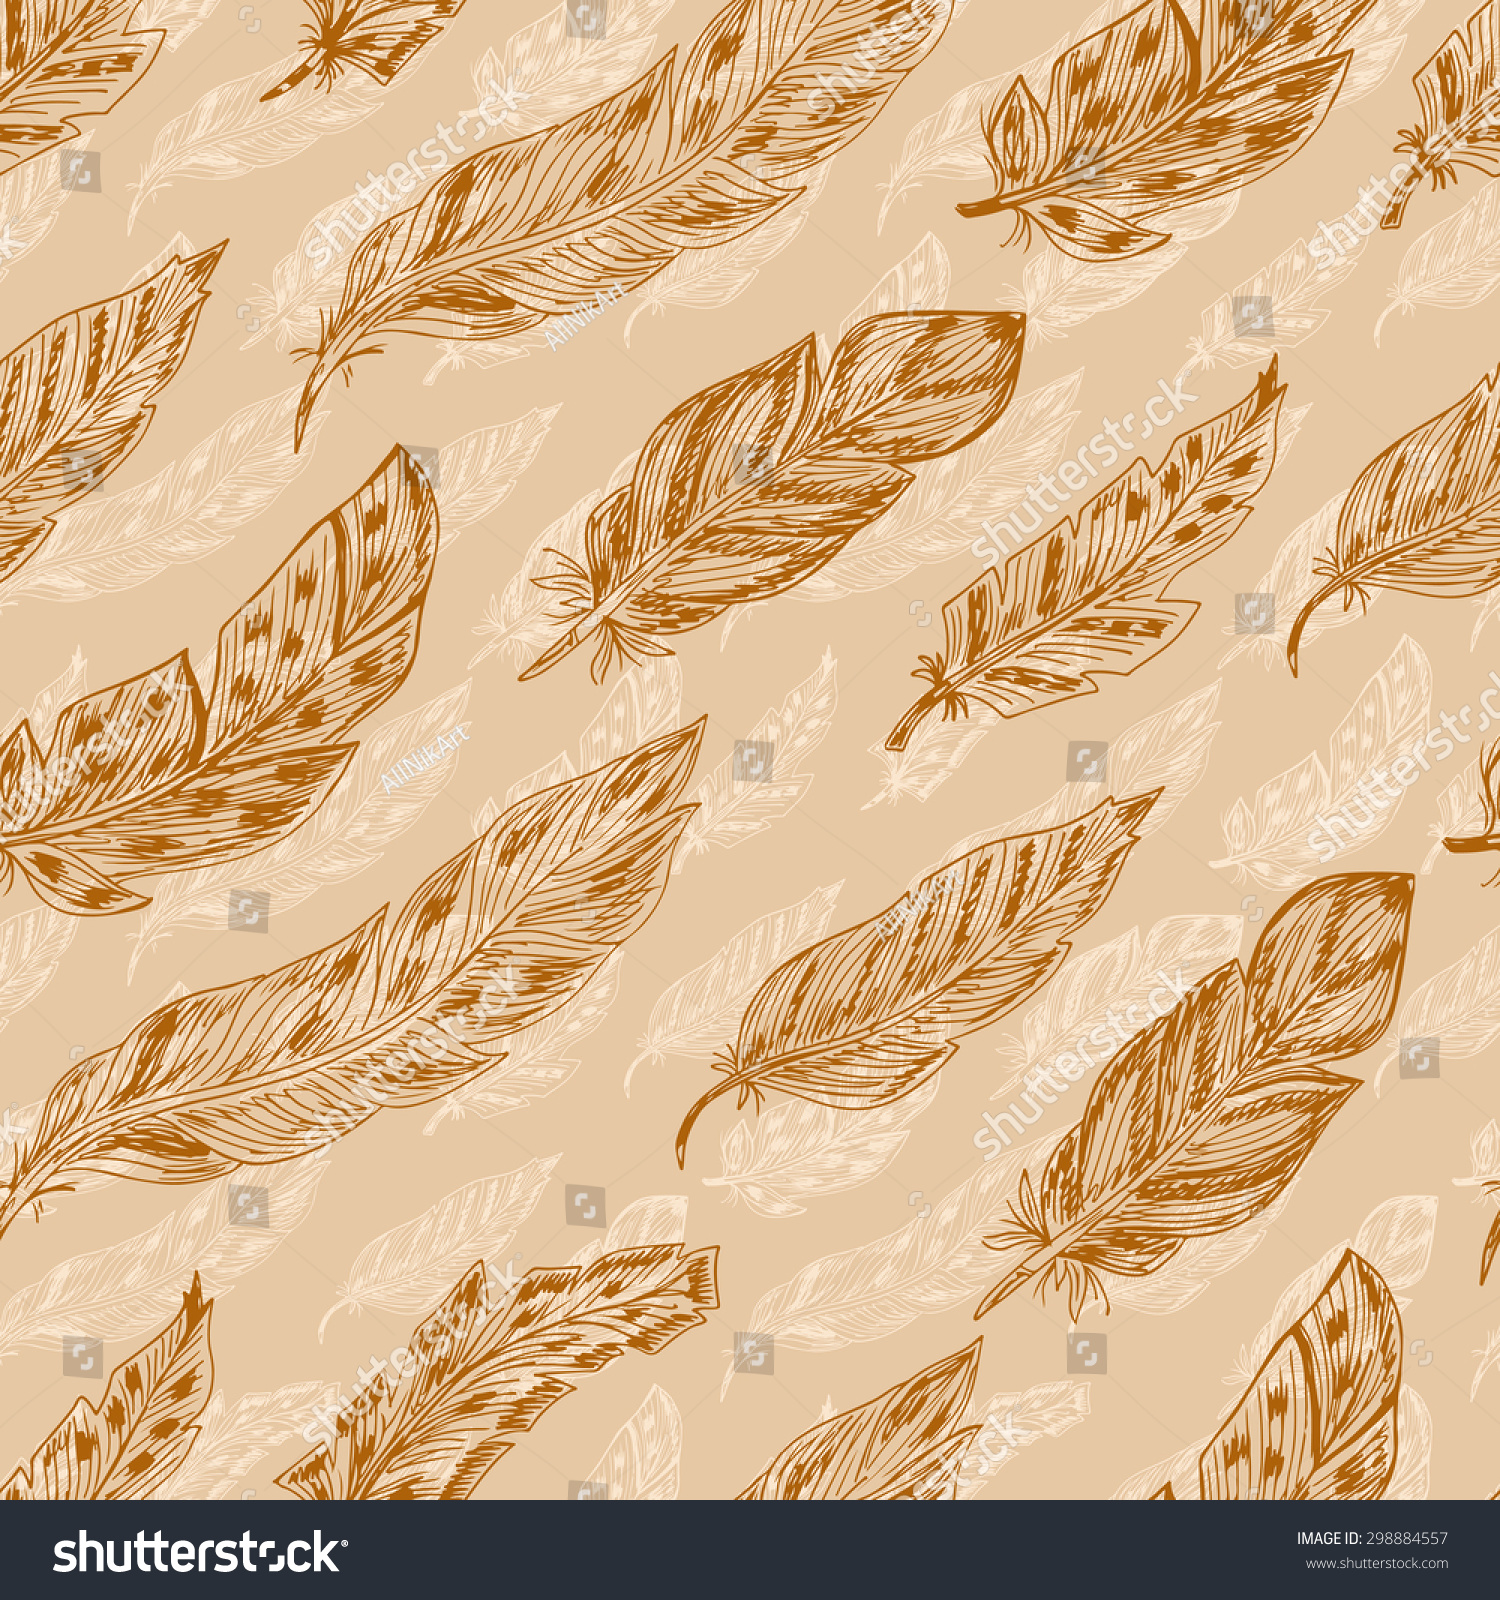 Feathers Seamless Pattern Vintage Wallpaper Stock Vector